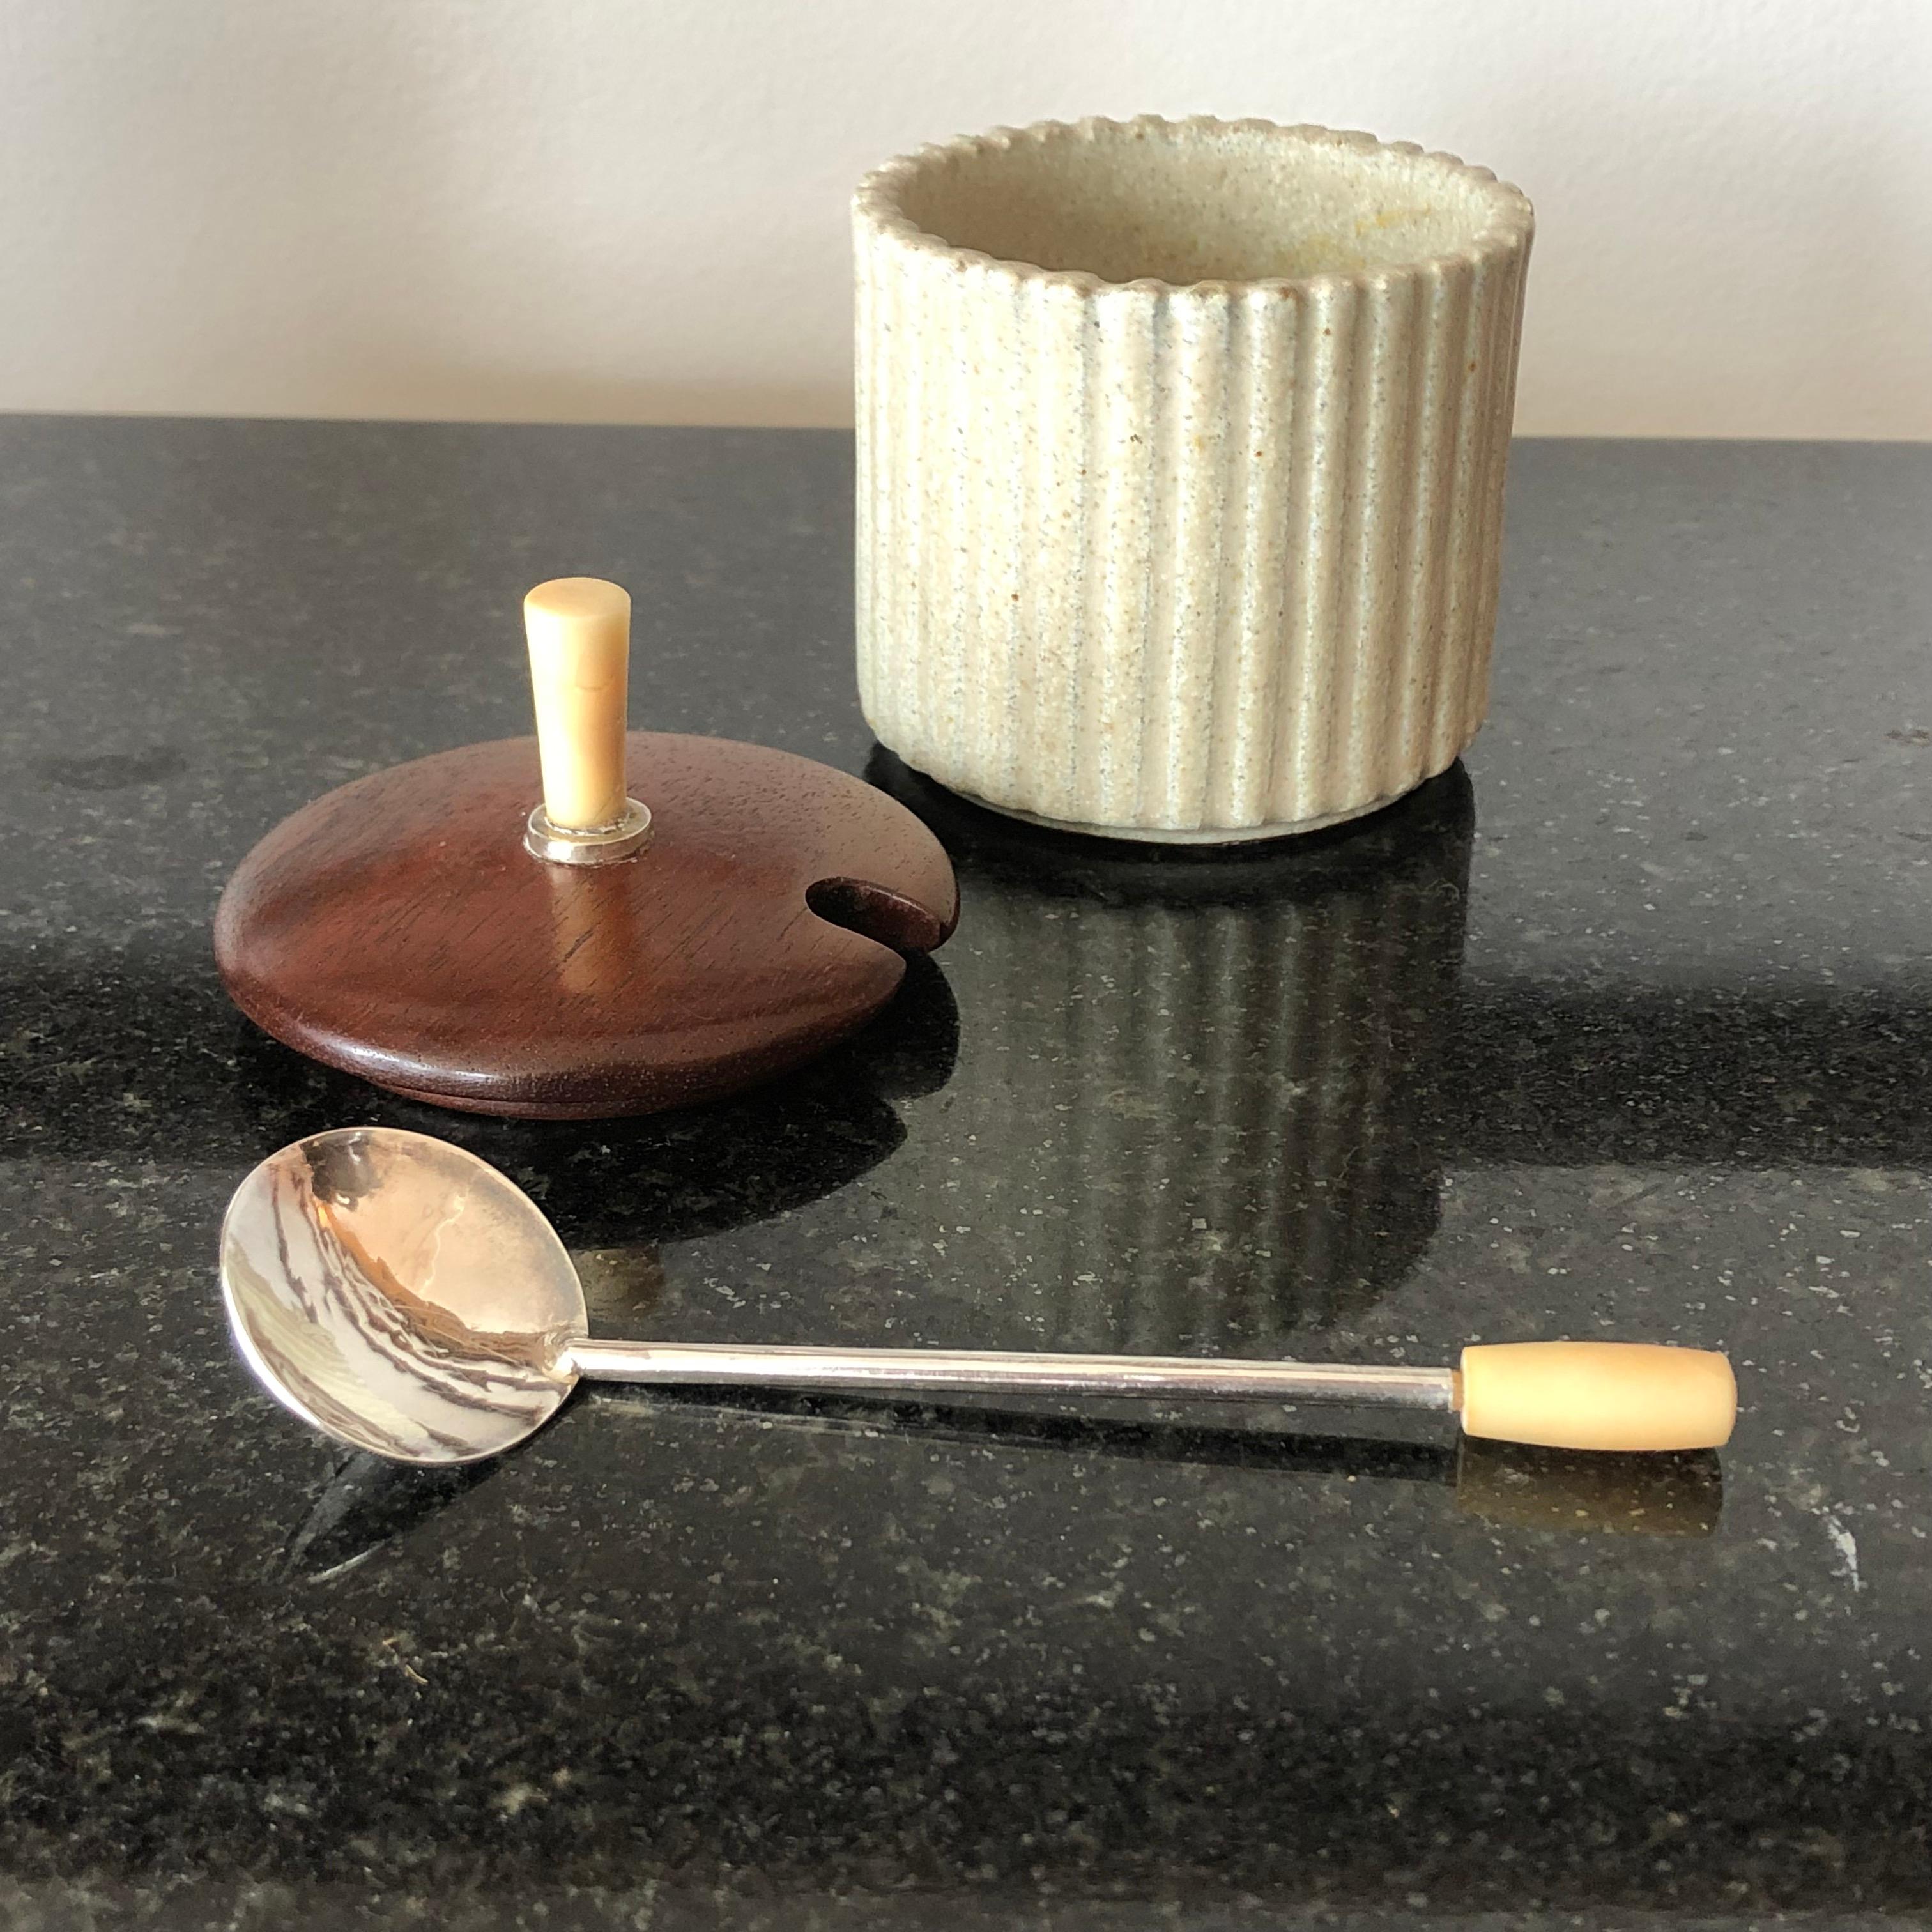 A fine quality Danish art pottery mustard or jam pot by Arne Bang, the reeded beige stoneware base with a teak cover decorated with a silver and bone finial, together with its original handmade sterling silver spoon with bone handle. Signed and